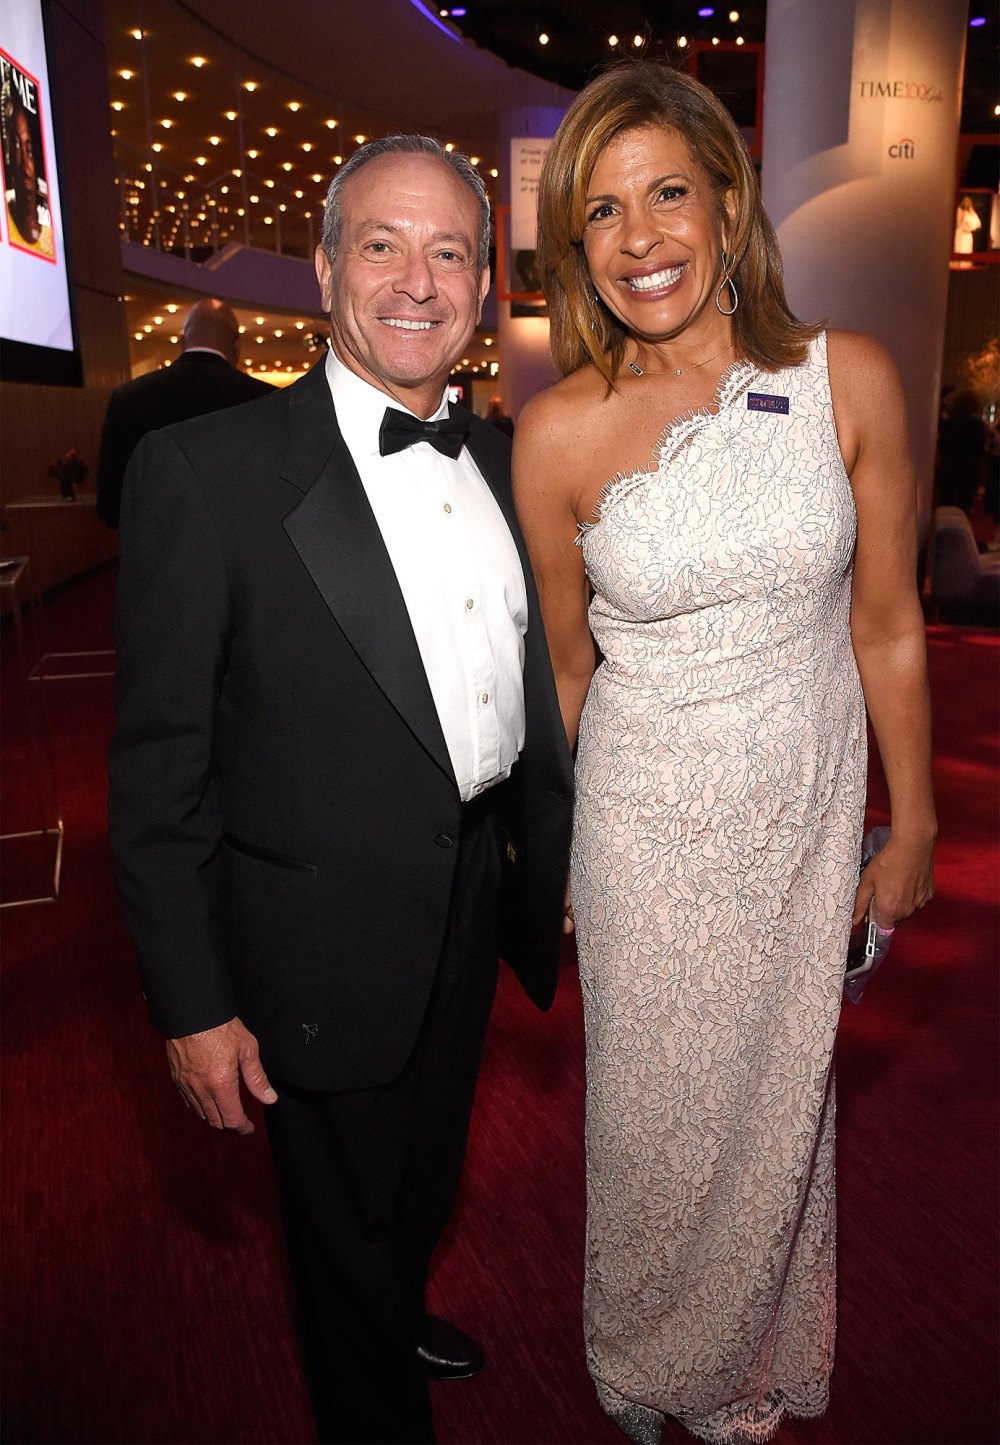 Hoda Kotb Gushes About Her Really Handsome New Man After Going on a 3rd Date Together 995